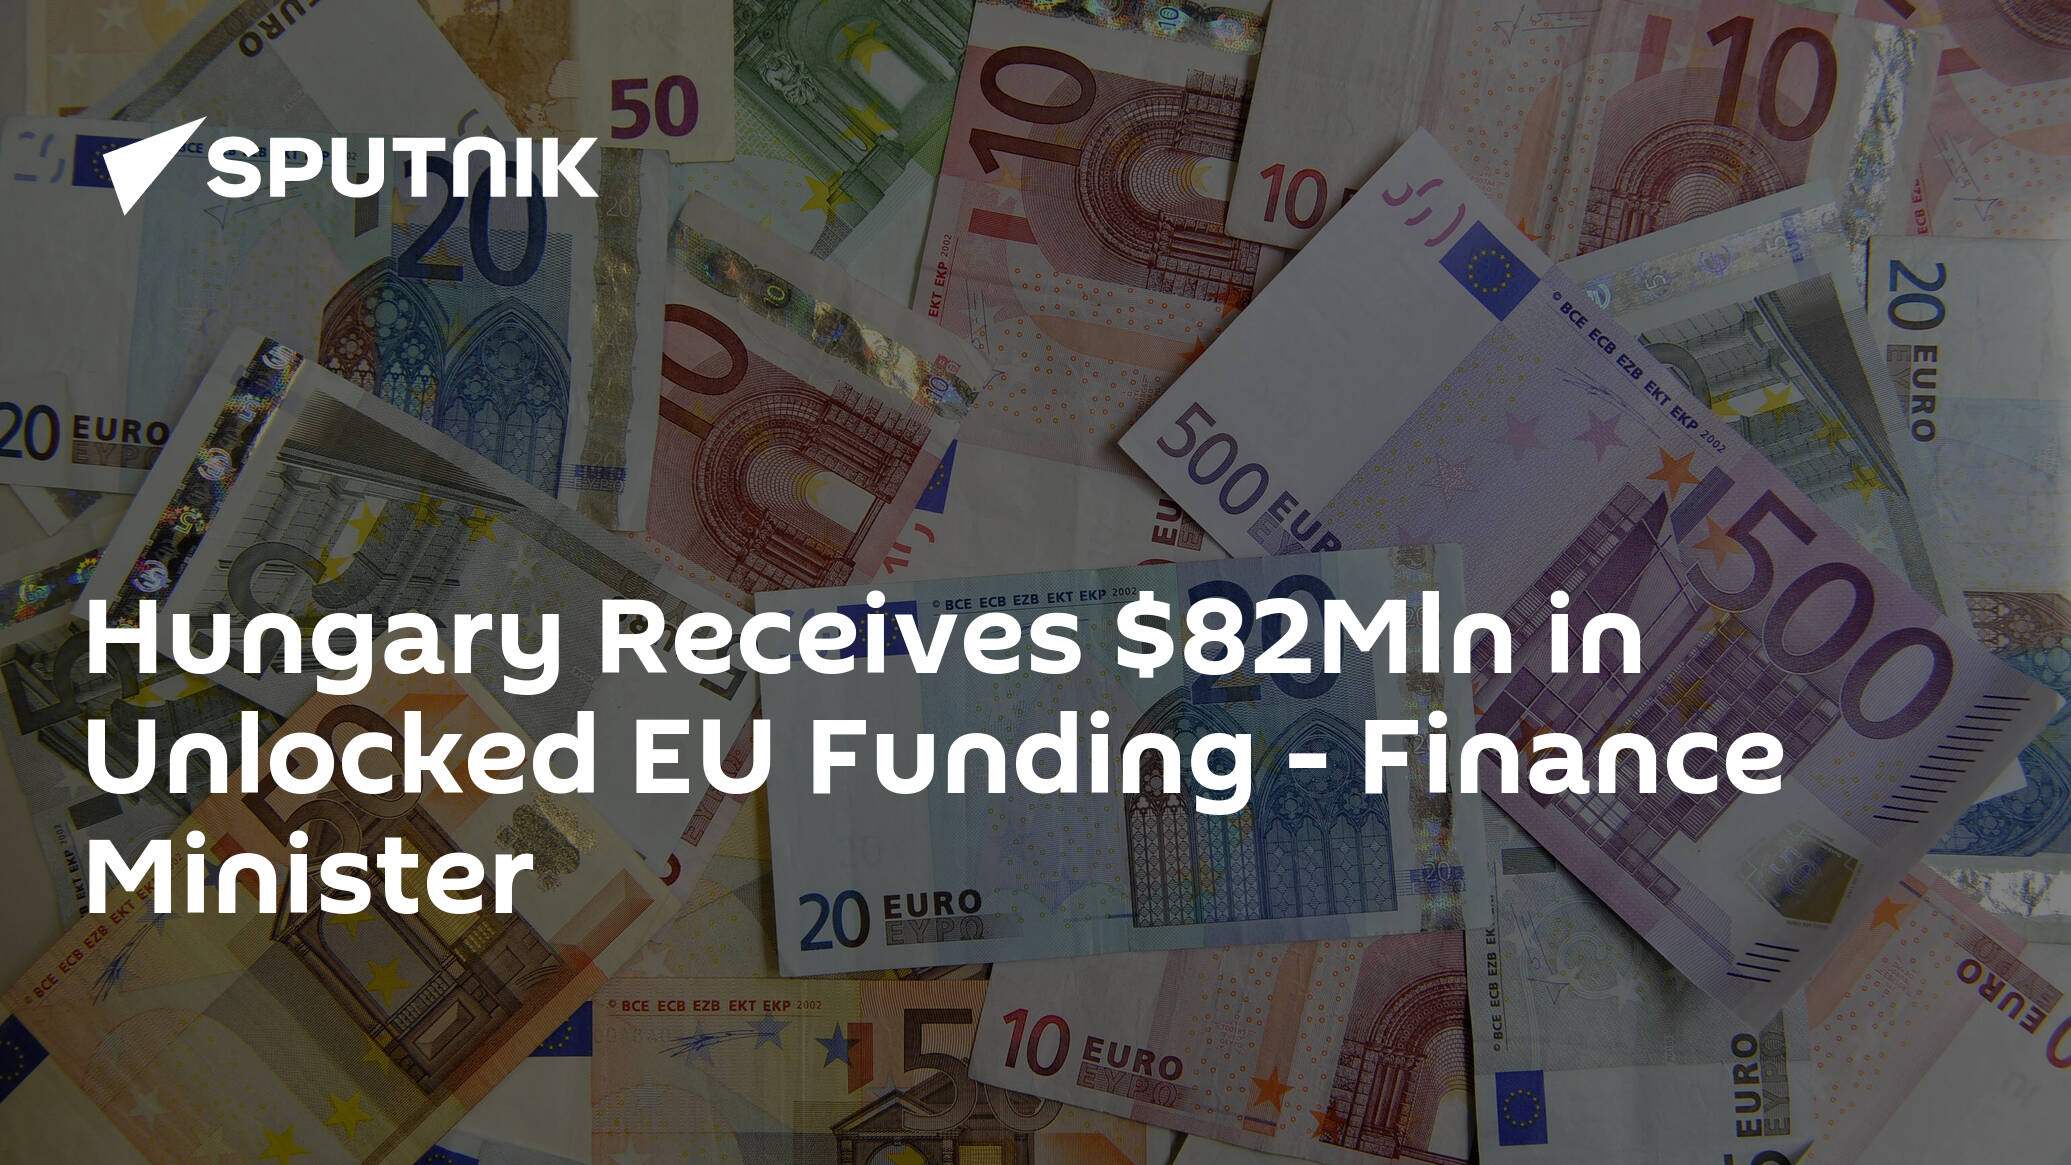 Hungary Receives $82Mln in Unlocked EU Funding - Finance Minister